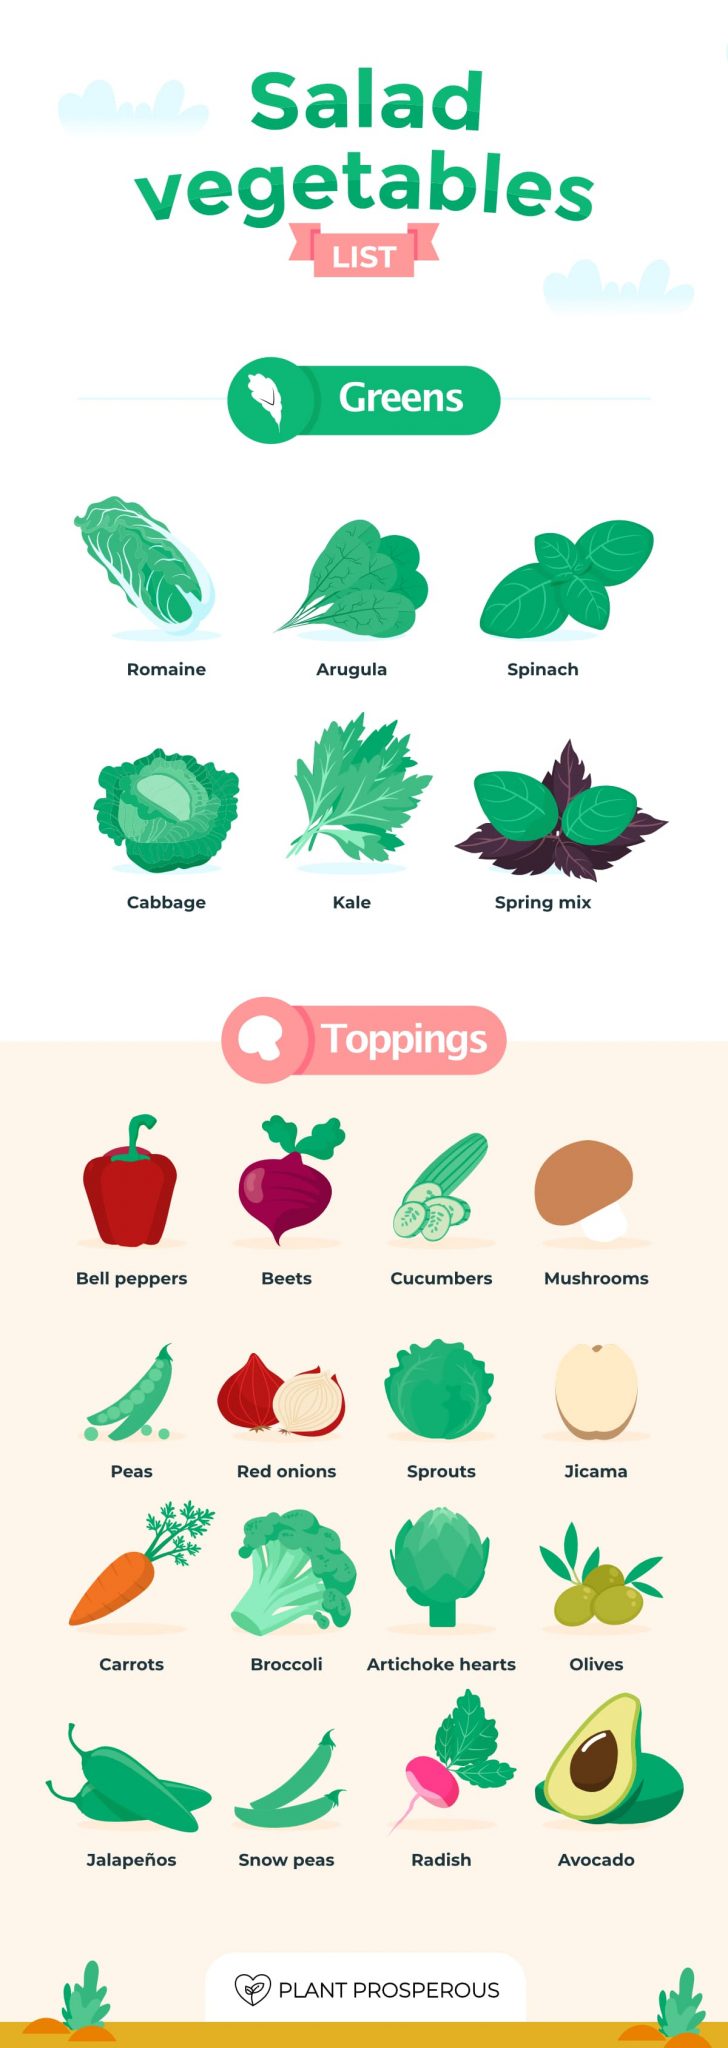 Ultimate List of Fruits and Vegetables from A to Z - Plant Prosperous